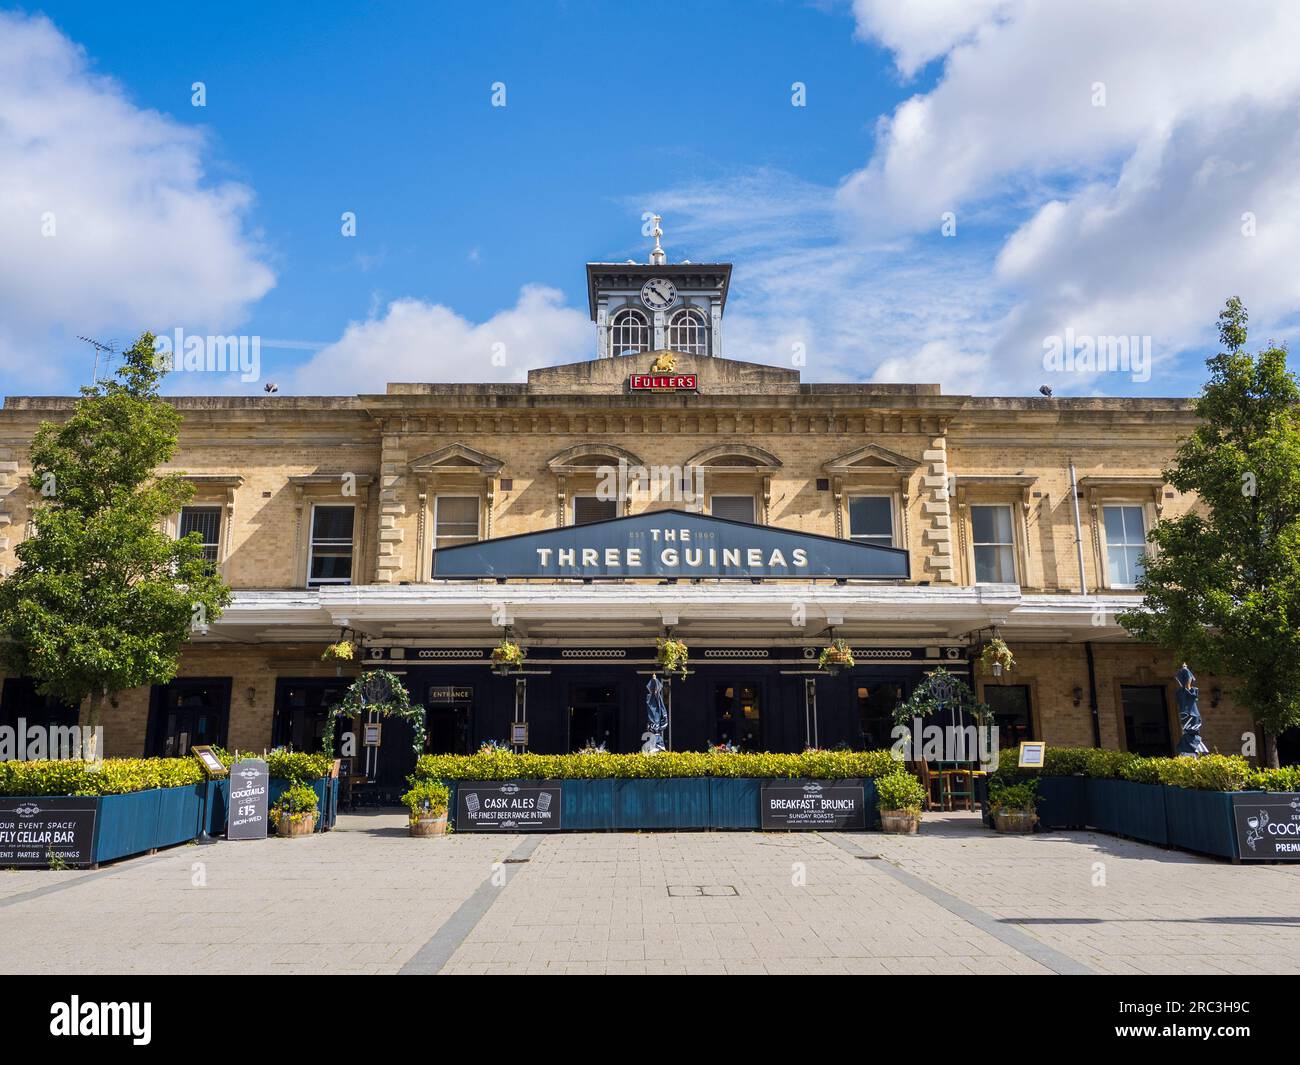 The Three Guineas, Victorian Pub, Reading Railway Station, Reading, Berkshire, Angleterre, Royaume-Uni, GB. Banque D'Images